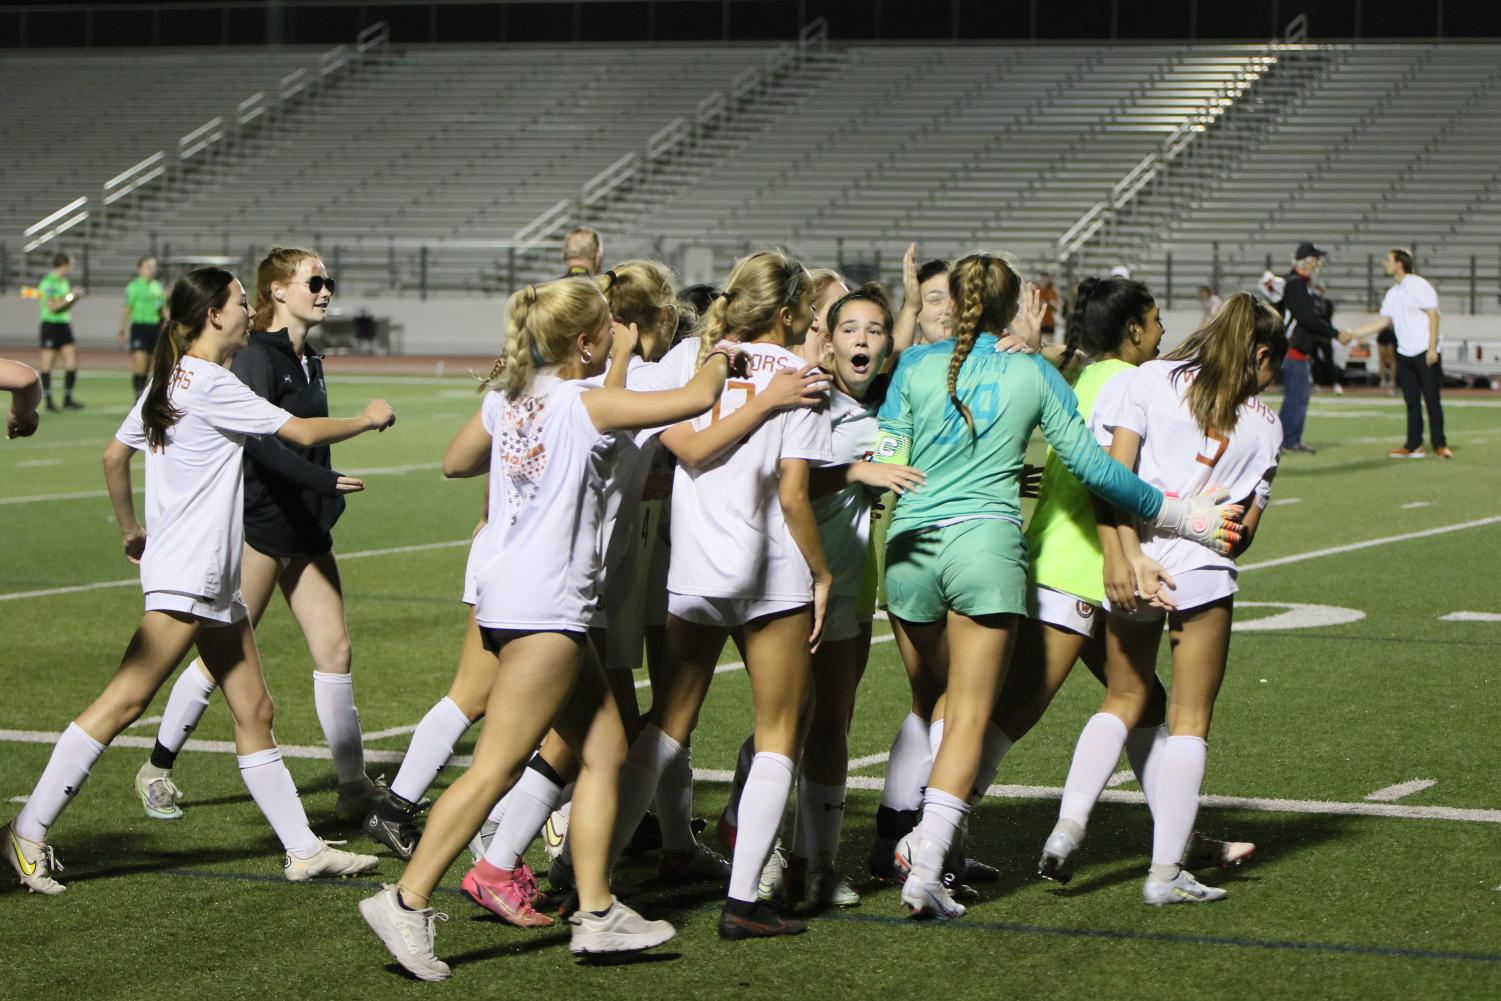 Varsity+Girls+Soccer+Advance+to+Round+Four+Playoffs+After+Dramatic+Showdown+Against+Vipers